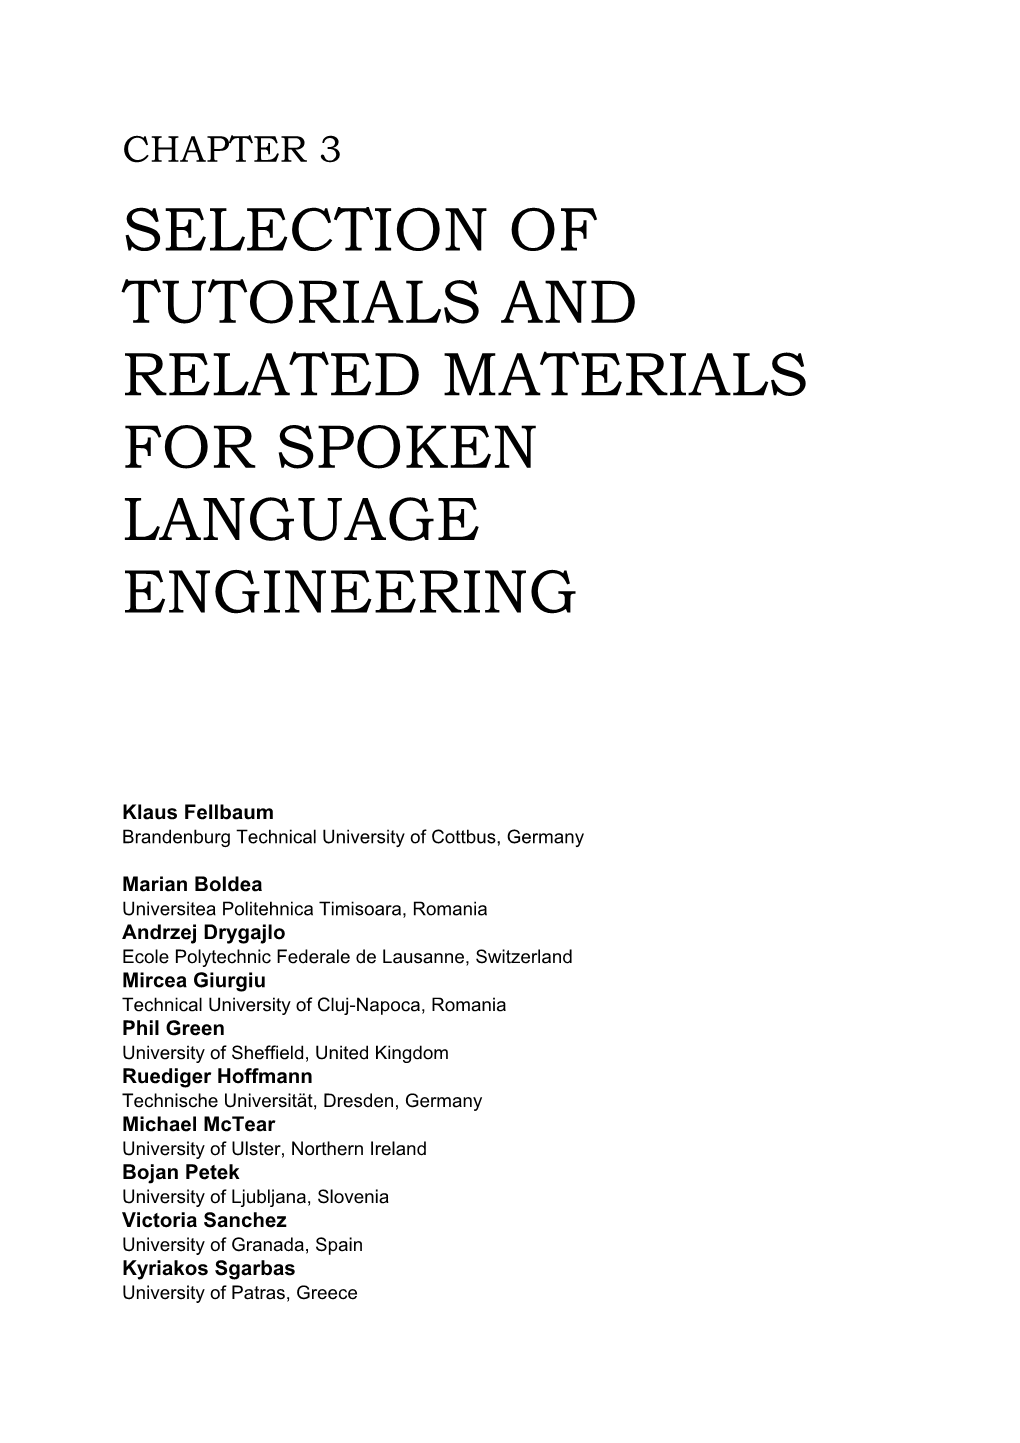 Selection of Tutorials and Related Materials for Spoken Language Engineering